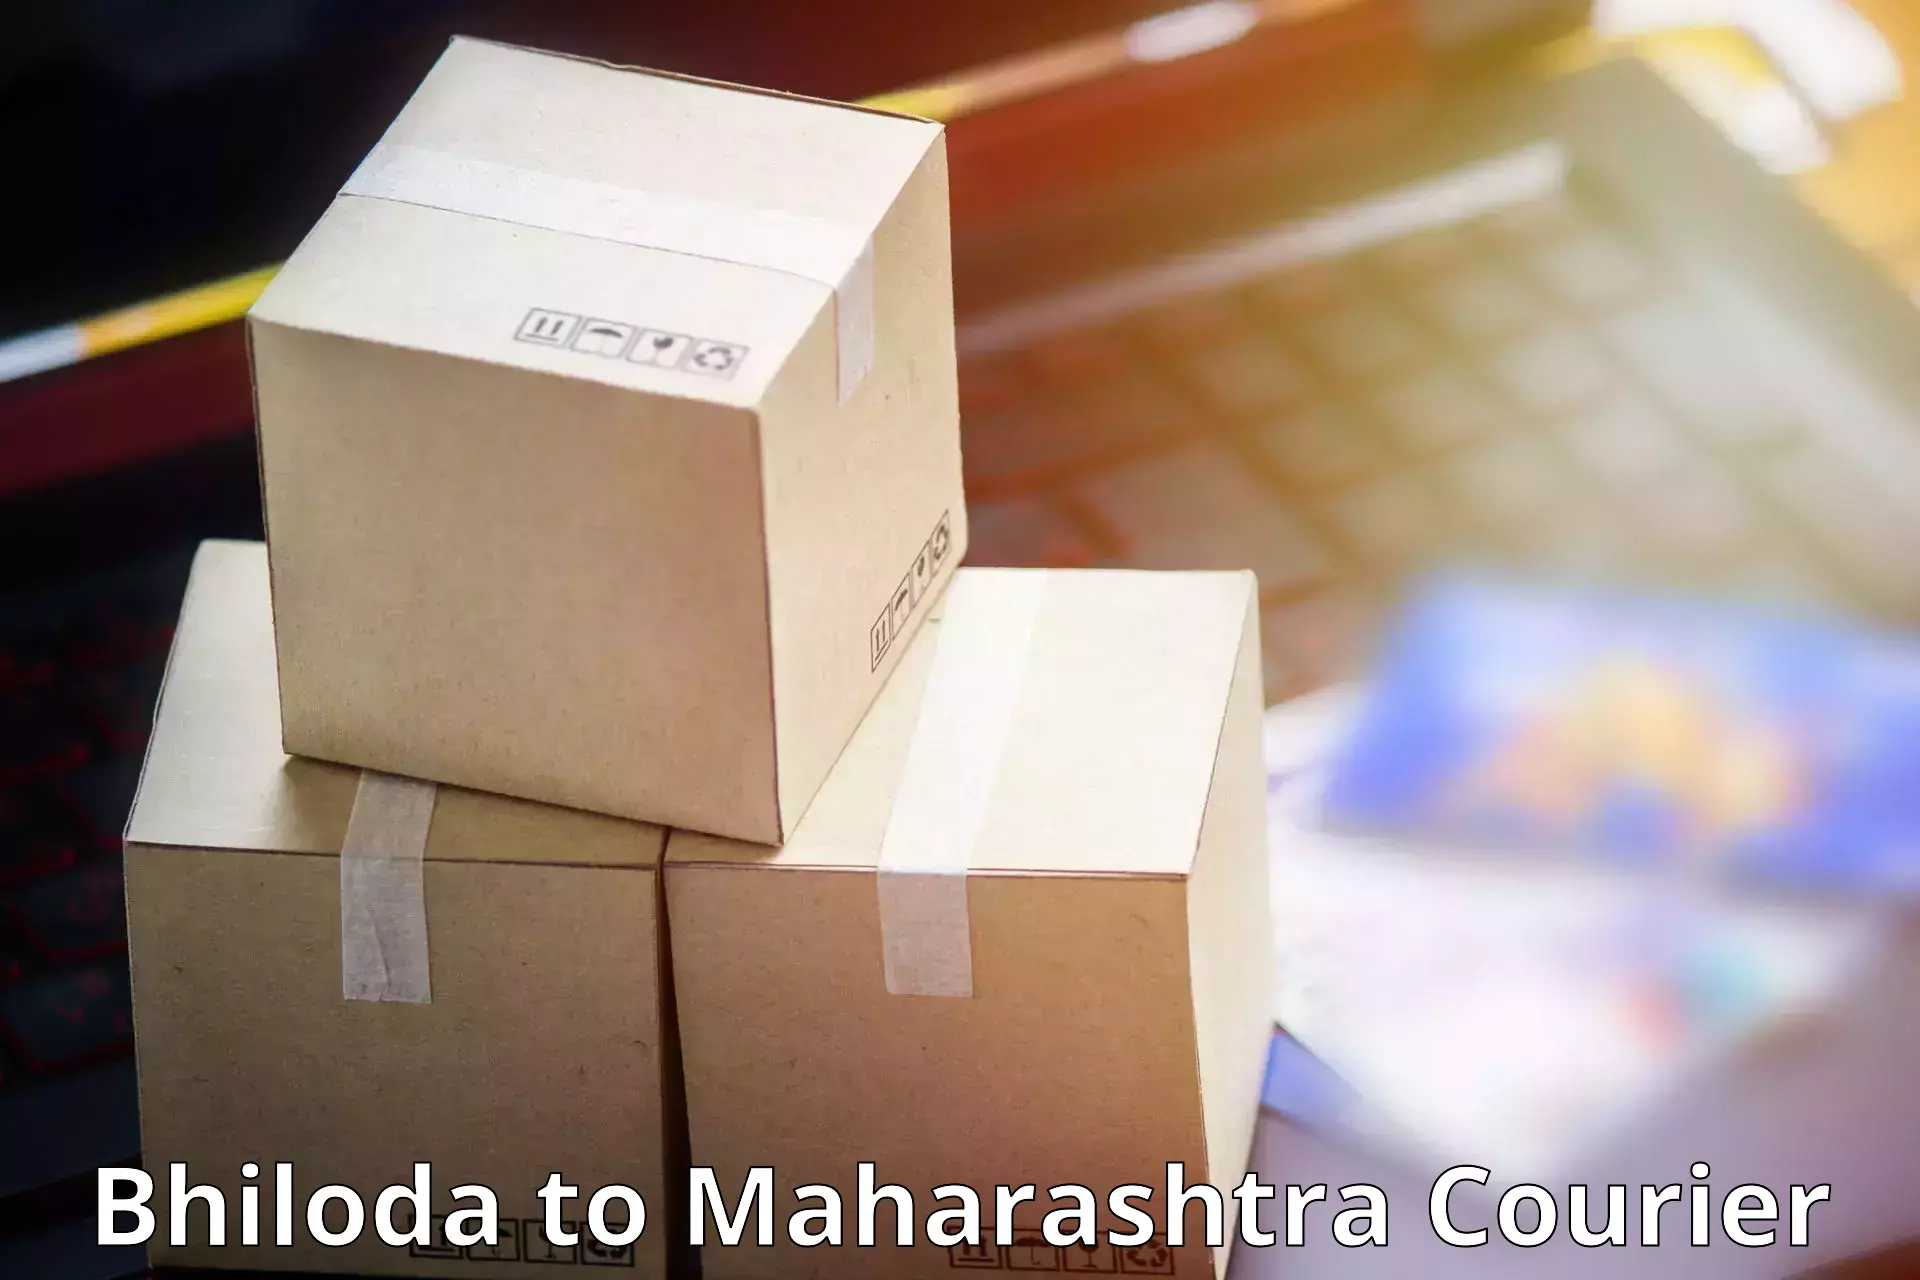 State-of-the-art courier technology Bhiloda to Gadchandur